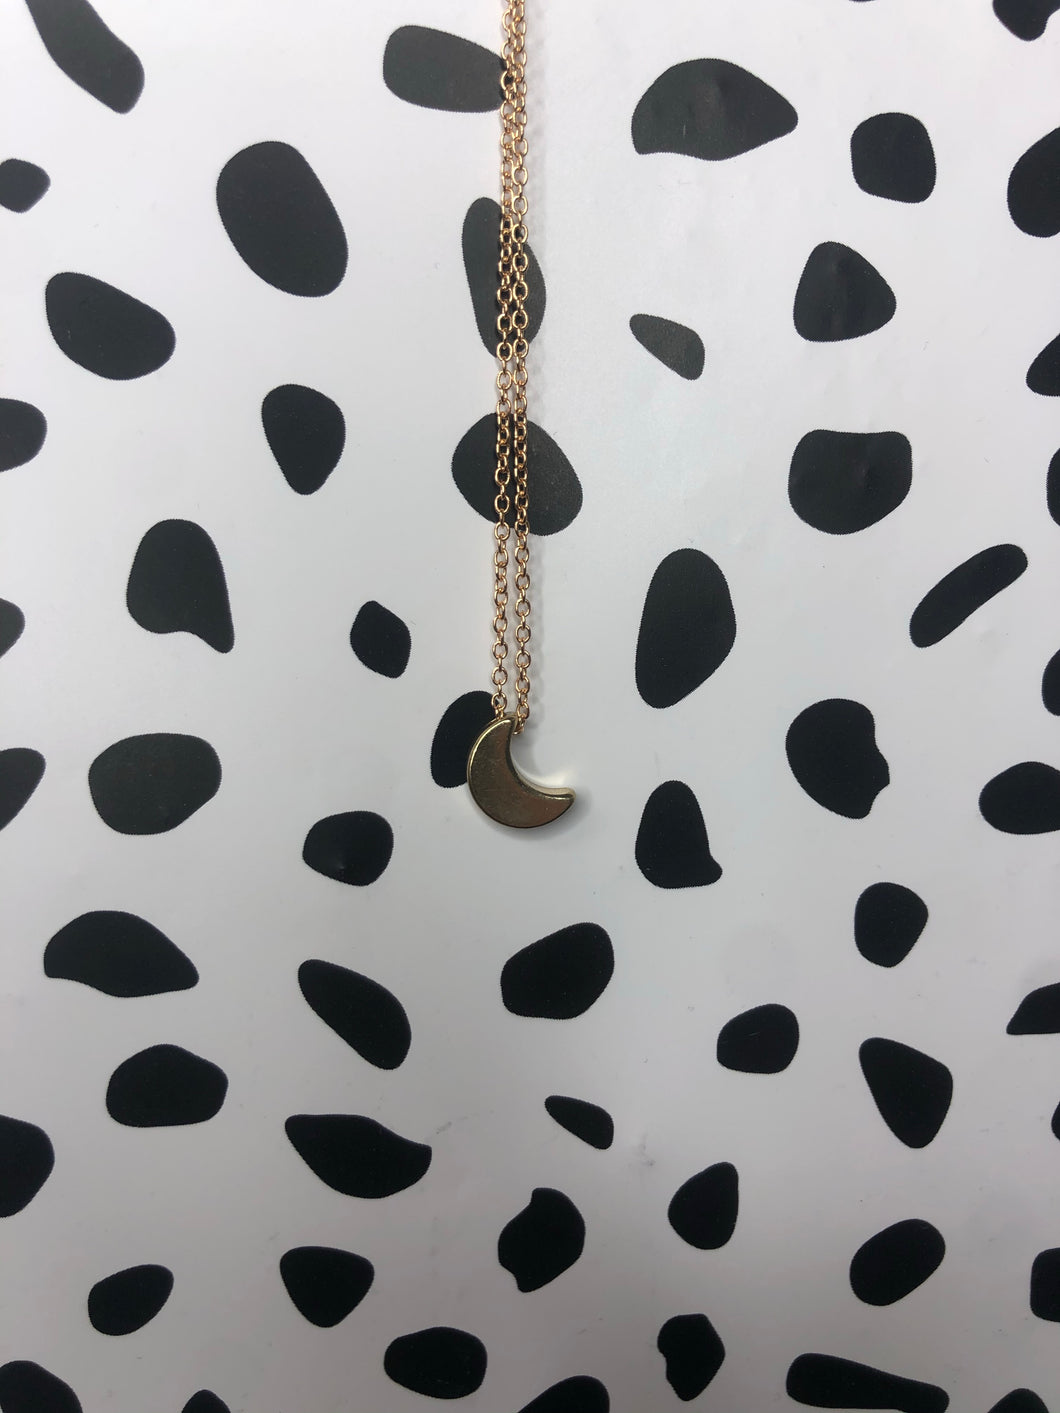 Gold moon necklace